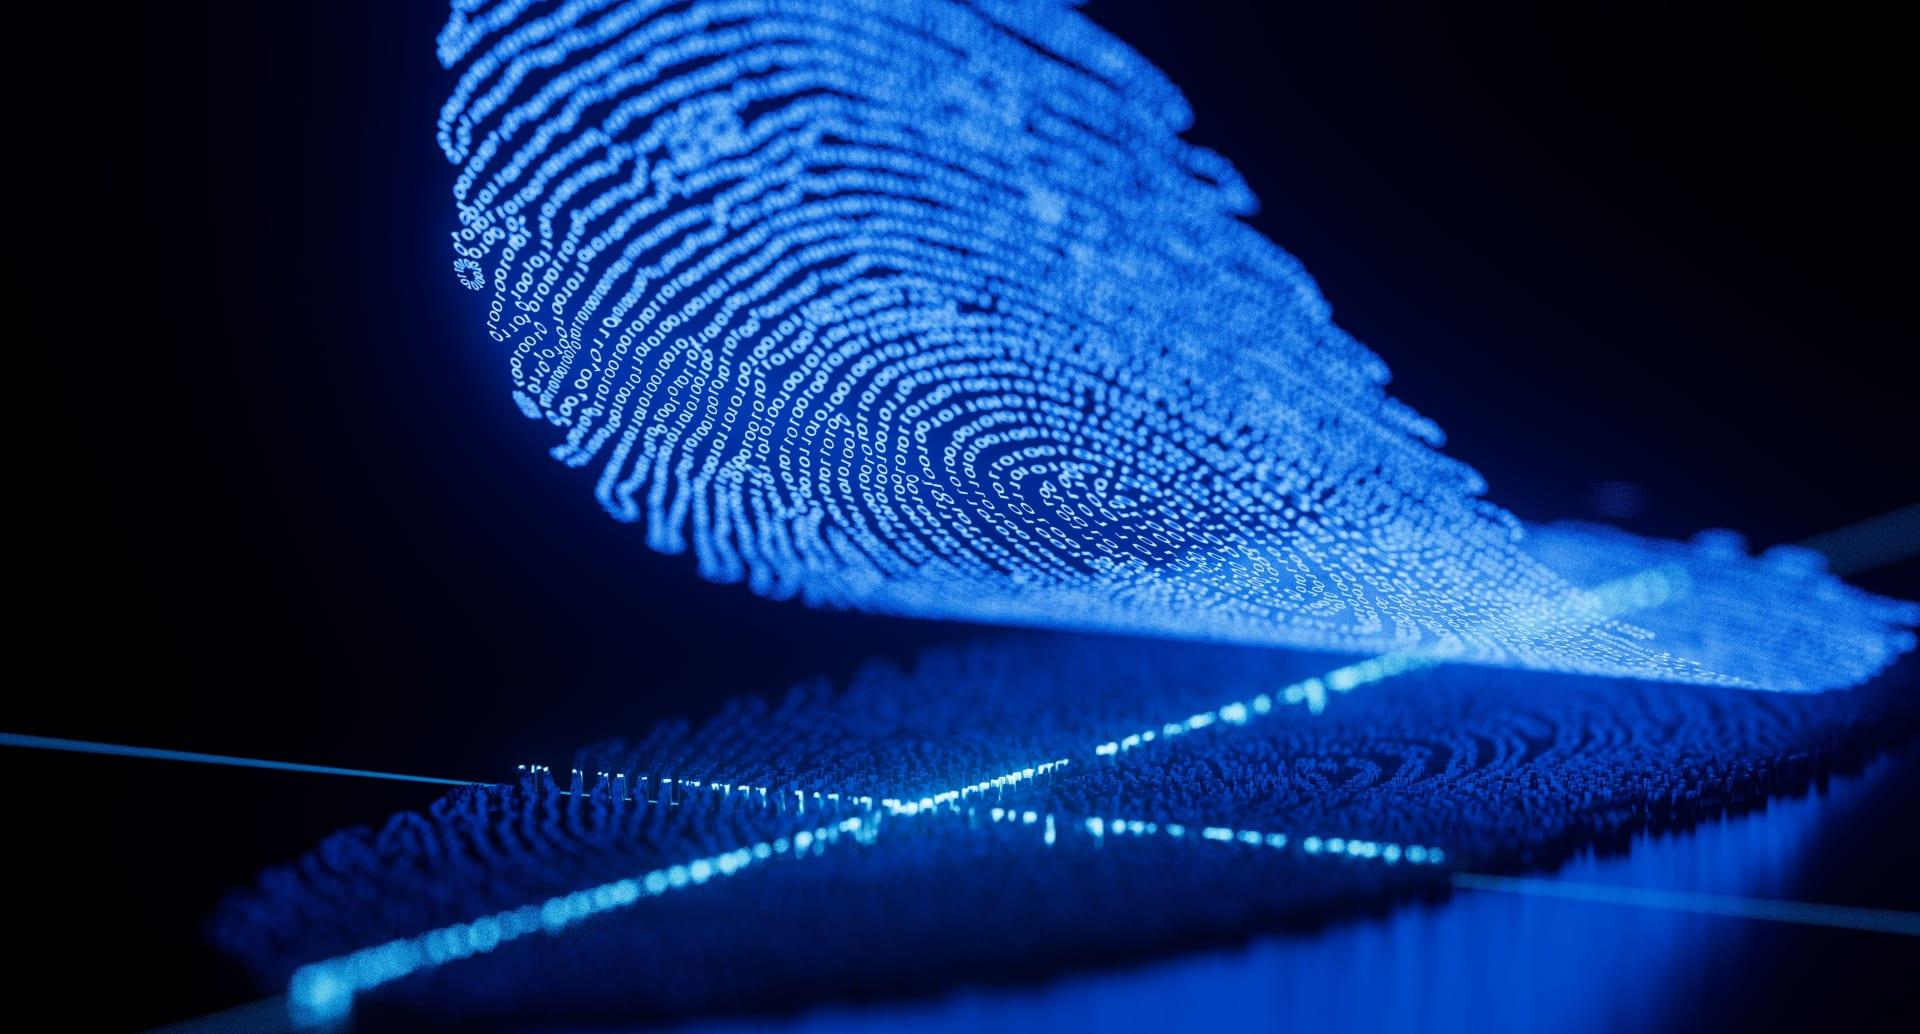 Google illegally gathers biometric data on non-consenting individuals, says Texas AG